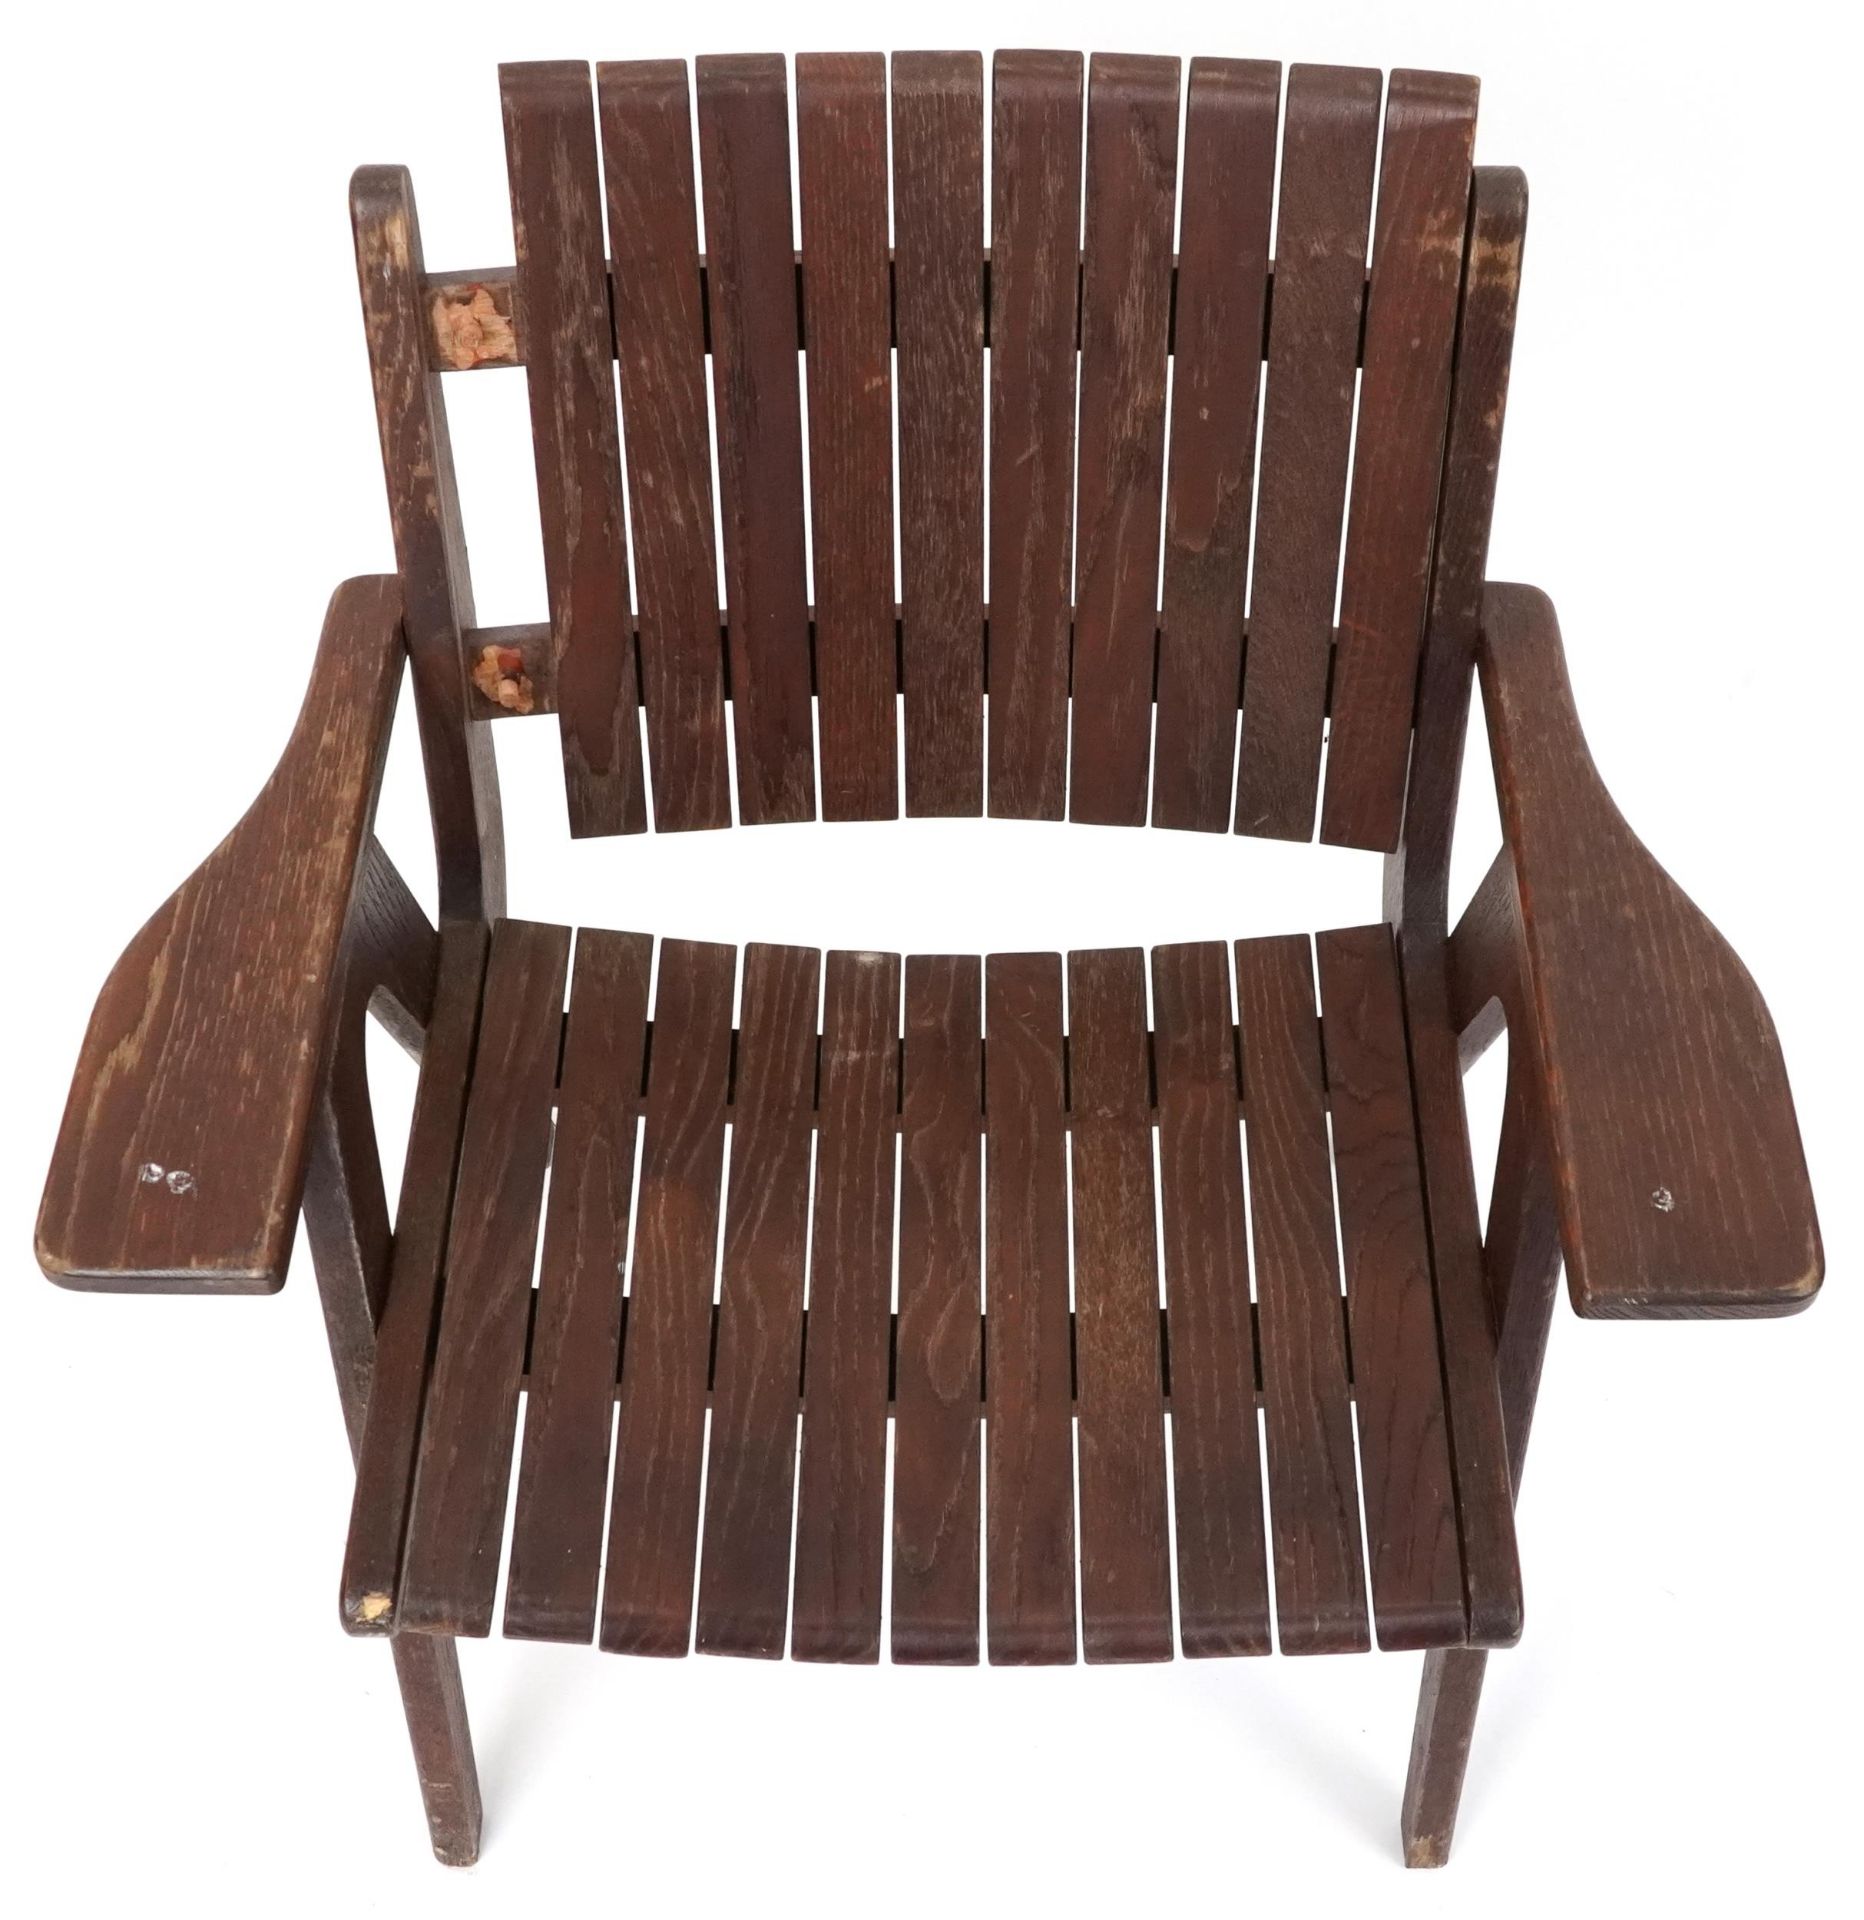 Autoban, stained teak slice chair, 81cm high - Image 3 of 4